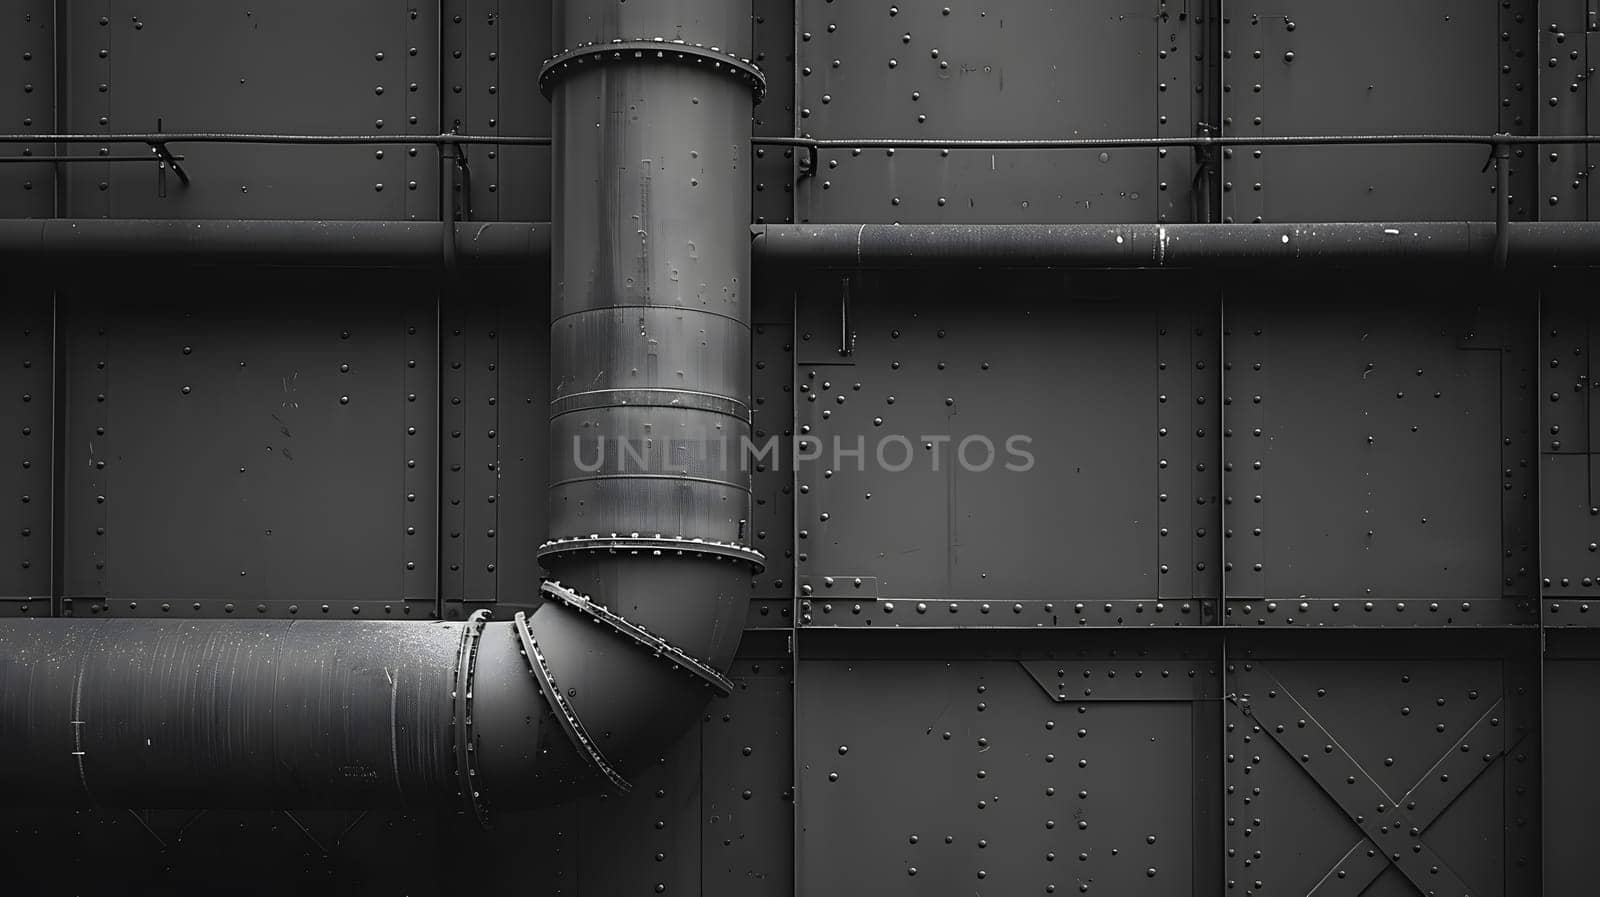 A monochrome photograph capturing a grey metal pipe fixture on a wall, showcasing beautiful tints and shades in a symmetrical composition. The pipe is parallel to the building material